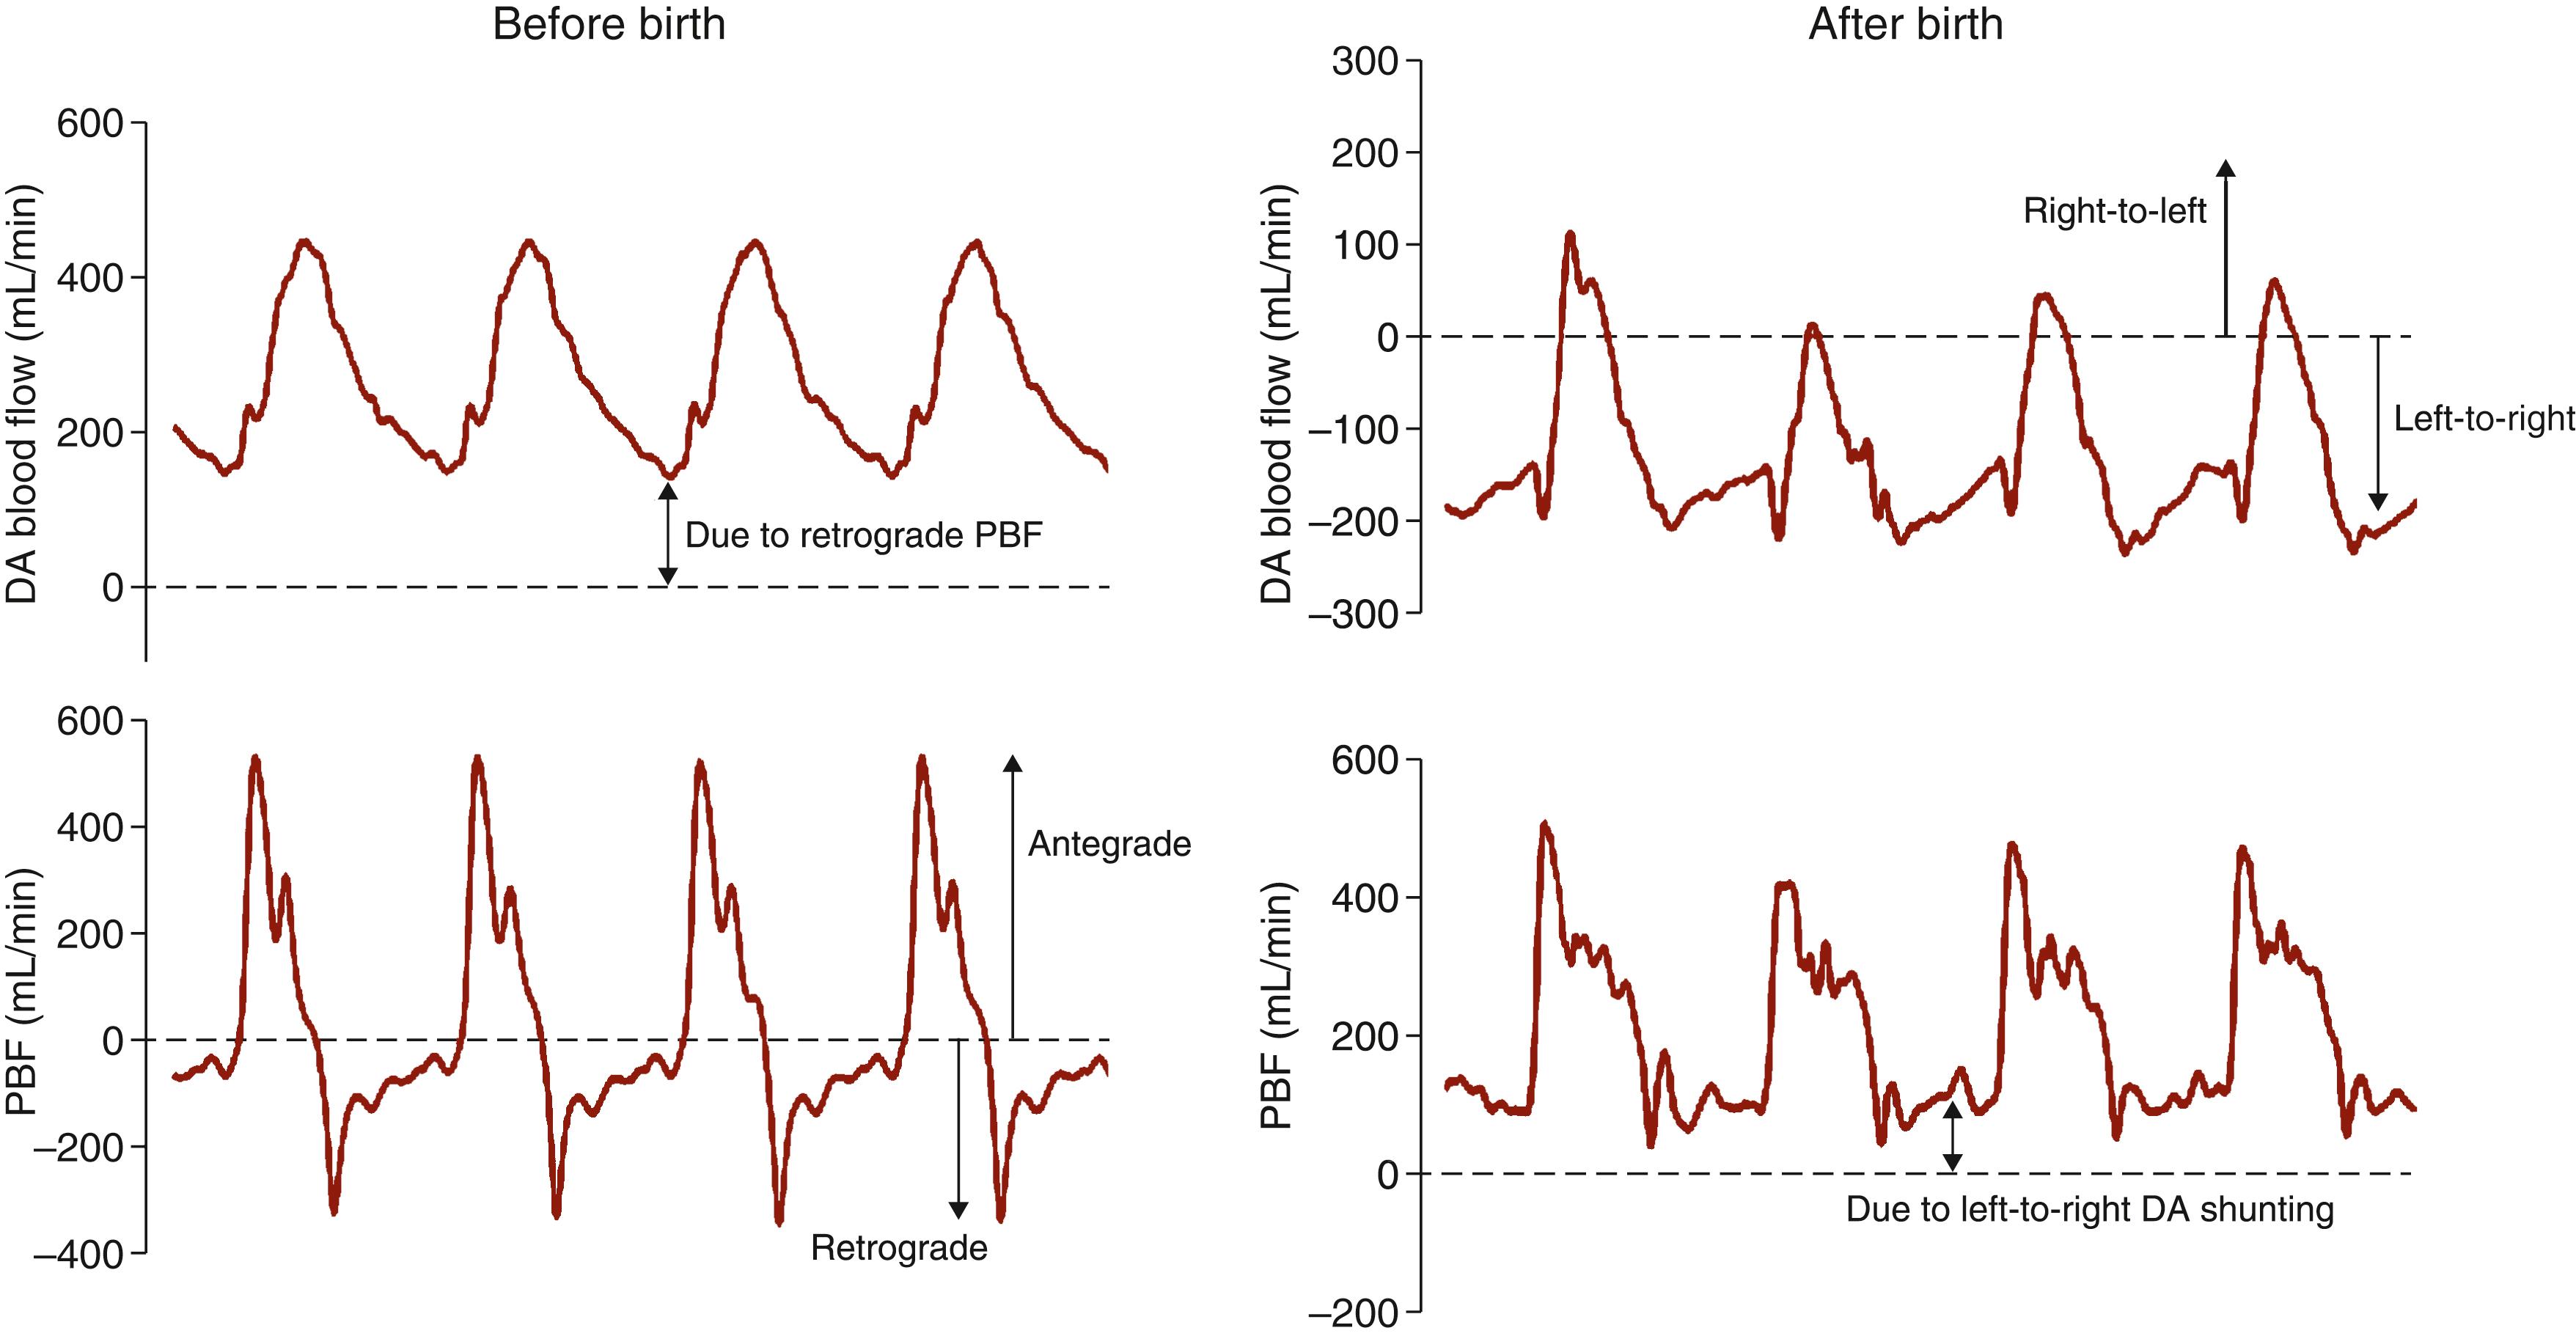 Fig. 150.9, Blood flow profiles in the left pulmonary artery (bottom panels) and in the ductus arteriosus ( DA ; top panels ) throughout four consecutive cardiac cycles before birth (left panels) and after birth, following lung aeration, in a newborn lamb. Before birth, retrograde (away from the lungs) pulmonary blood flow (PBF) is represented by negative PBF values and contributes to significant levels of right-to-left flow in the DA during diastole. As a result, continuous flow through the DA (right-to-left) occurs throughout the cardiac cycle. After birth and lung aeration, a decrease in pulmonary vascular resistance (PVR) causes a large increase in PBF, resulting in a loss of retrograde flow during diastole and the onset of left-to-right shunting through the DA. While DA flow is predominantly left-to-right, it is bidirectional. It is briefly right-to-left during early systole before reversing and becoming left-to-right in late systole and throughout diastole, when it significantly contributes to PBF. 38 This bidirectional pattern of DA flow is thought to result from the pressure wave emanating from the ventricle reaching the pulmonary artery end of the DA before the pressure wave arising from the left ventricle reaches the aortic end of the DA. As a result, the pressure gradient across the DA is initially right-to-left but then rapidly reverses to become left-to-right throughout most of the cardiac cycle.